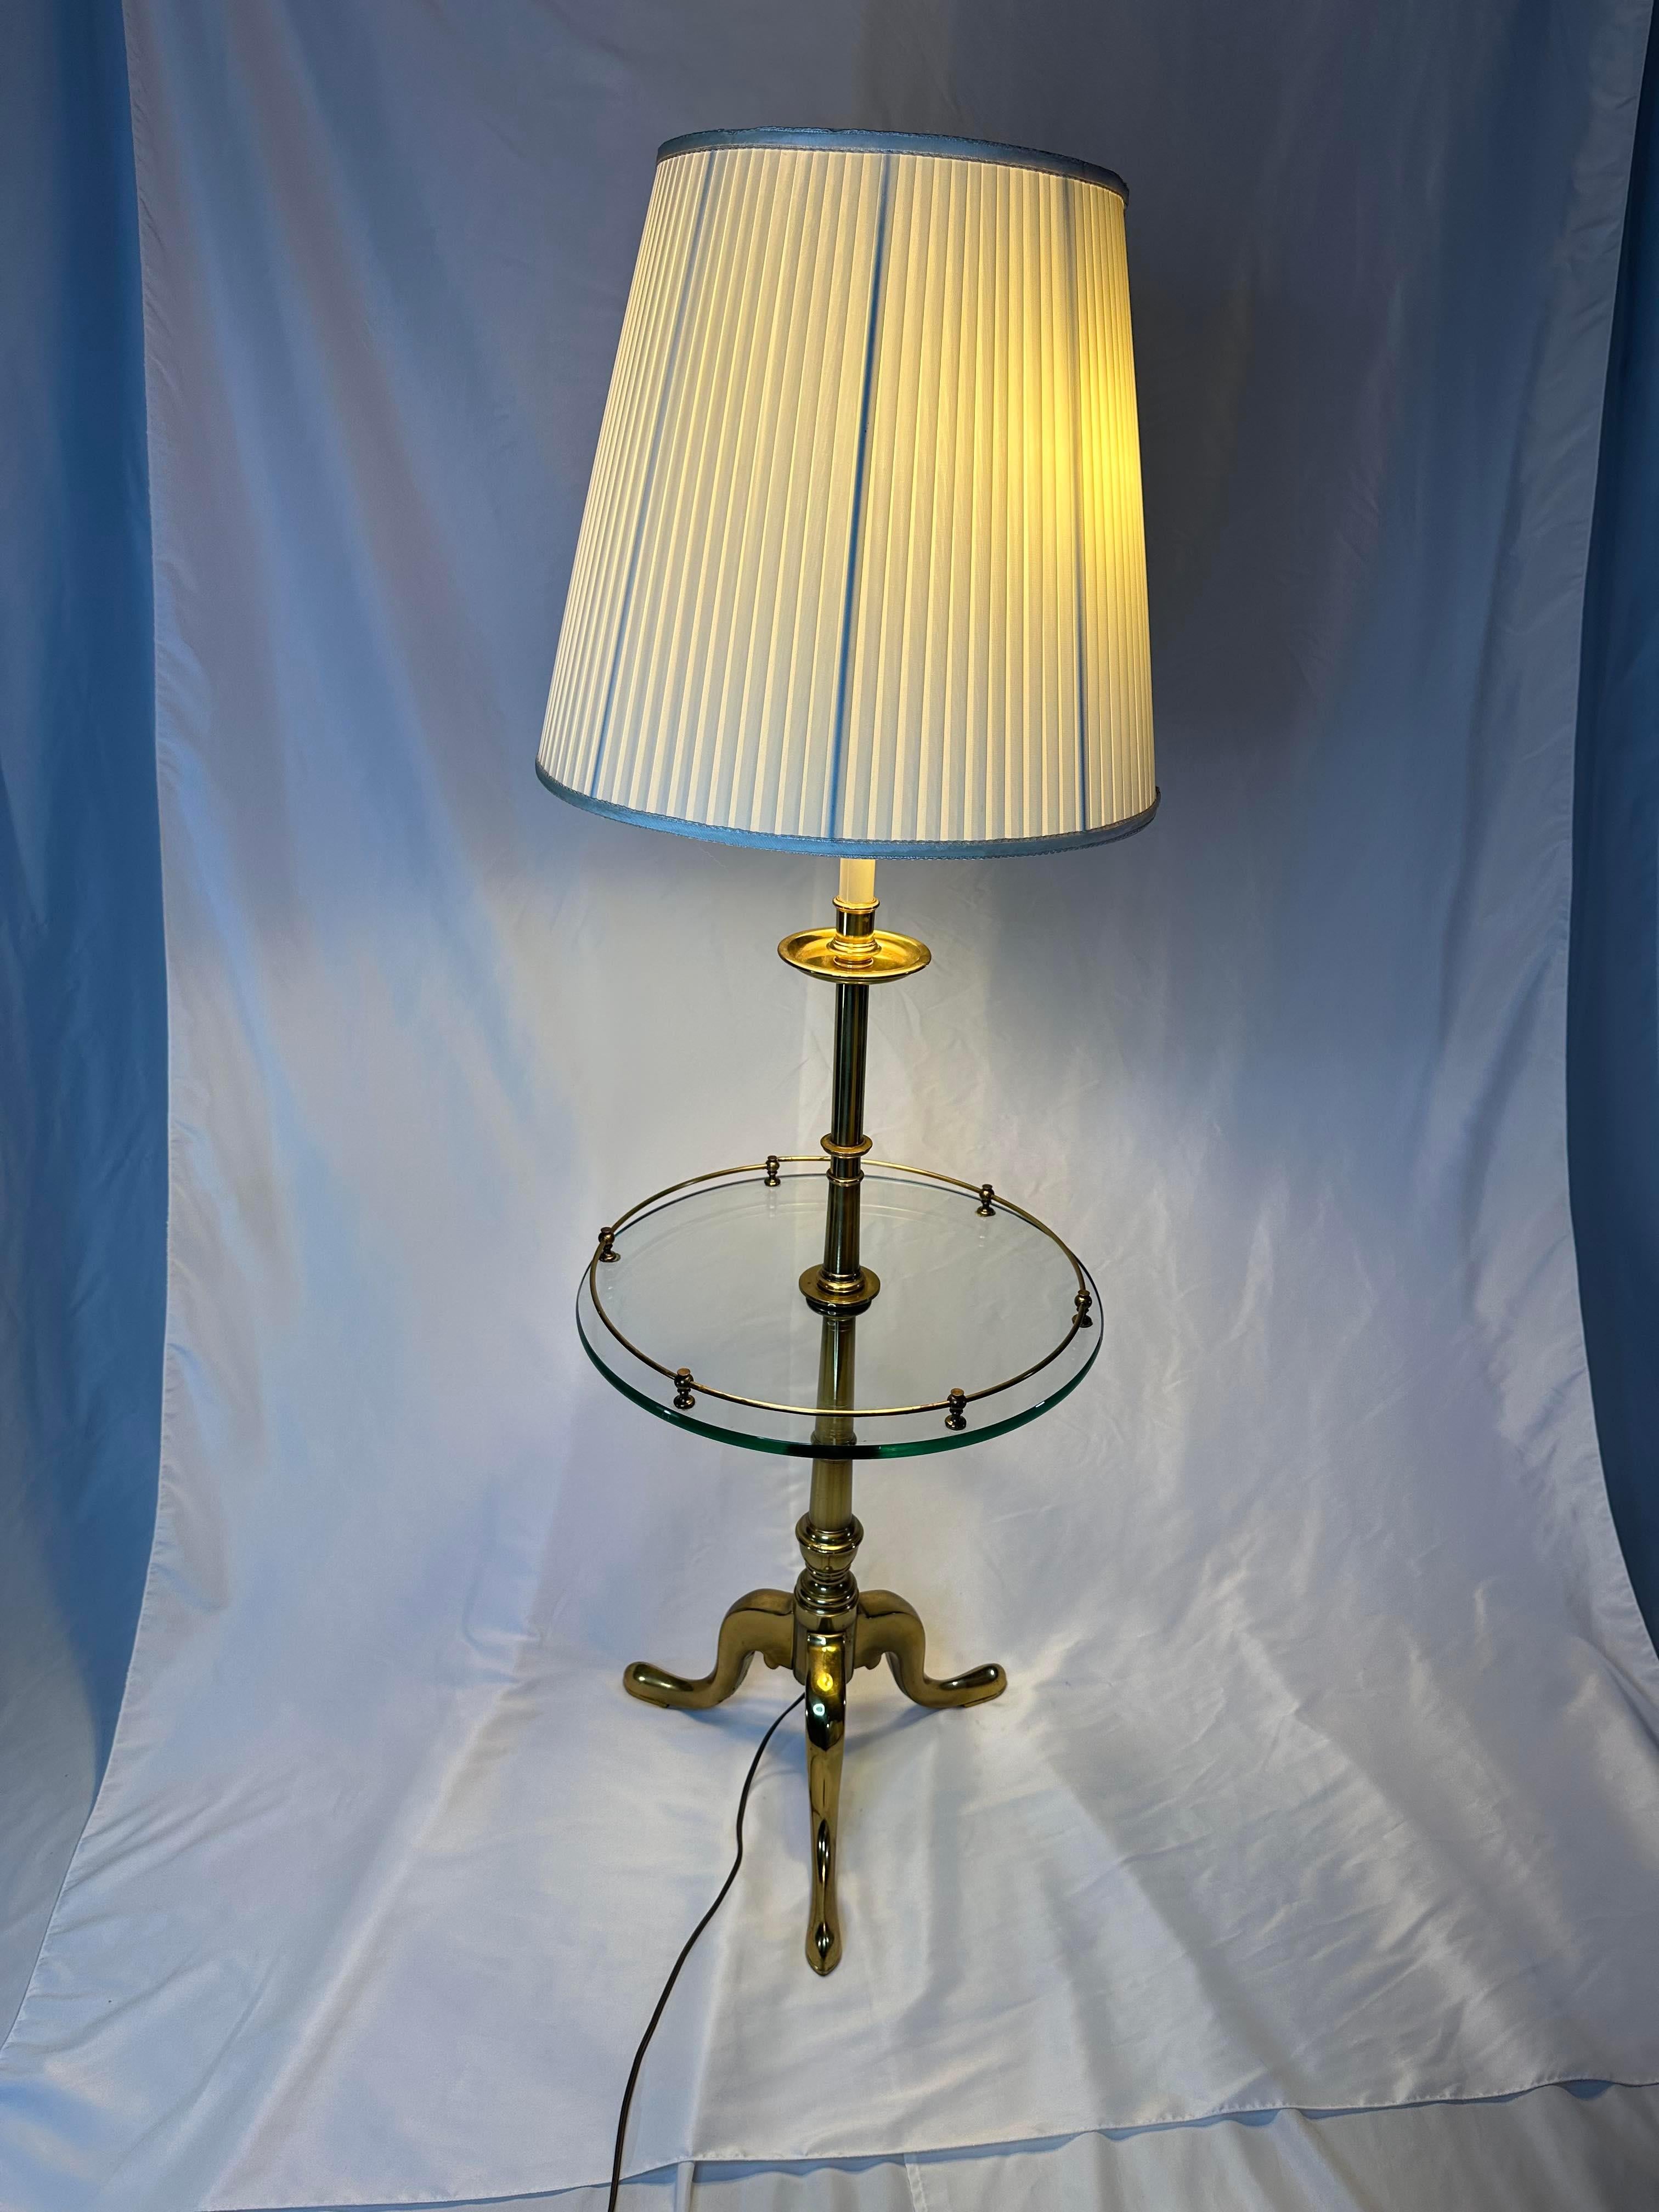 French Provincial Stiffel Floor Lamp With Glass Table and tripod legs For Sale 15